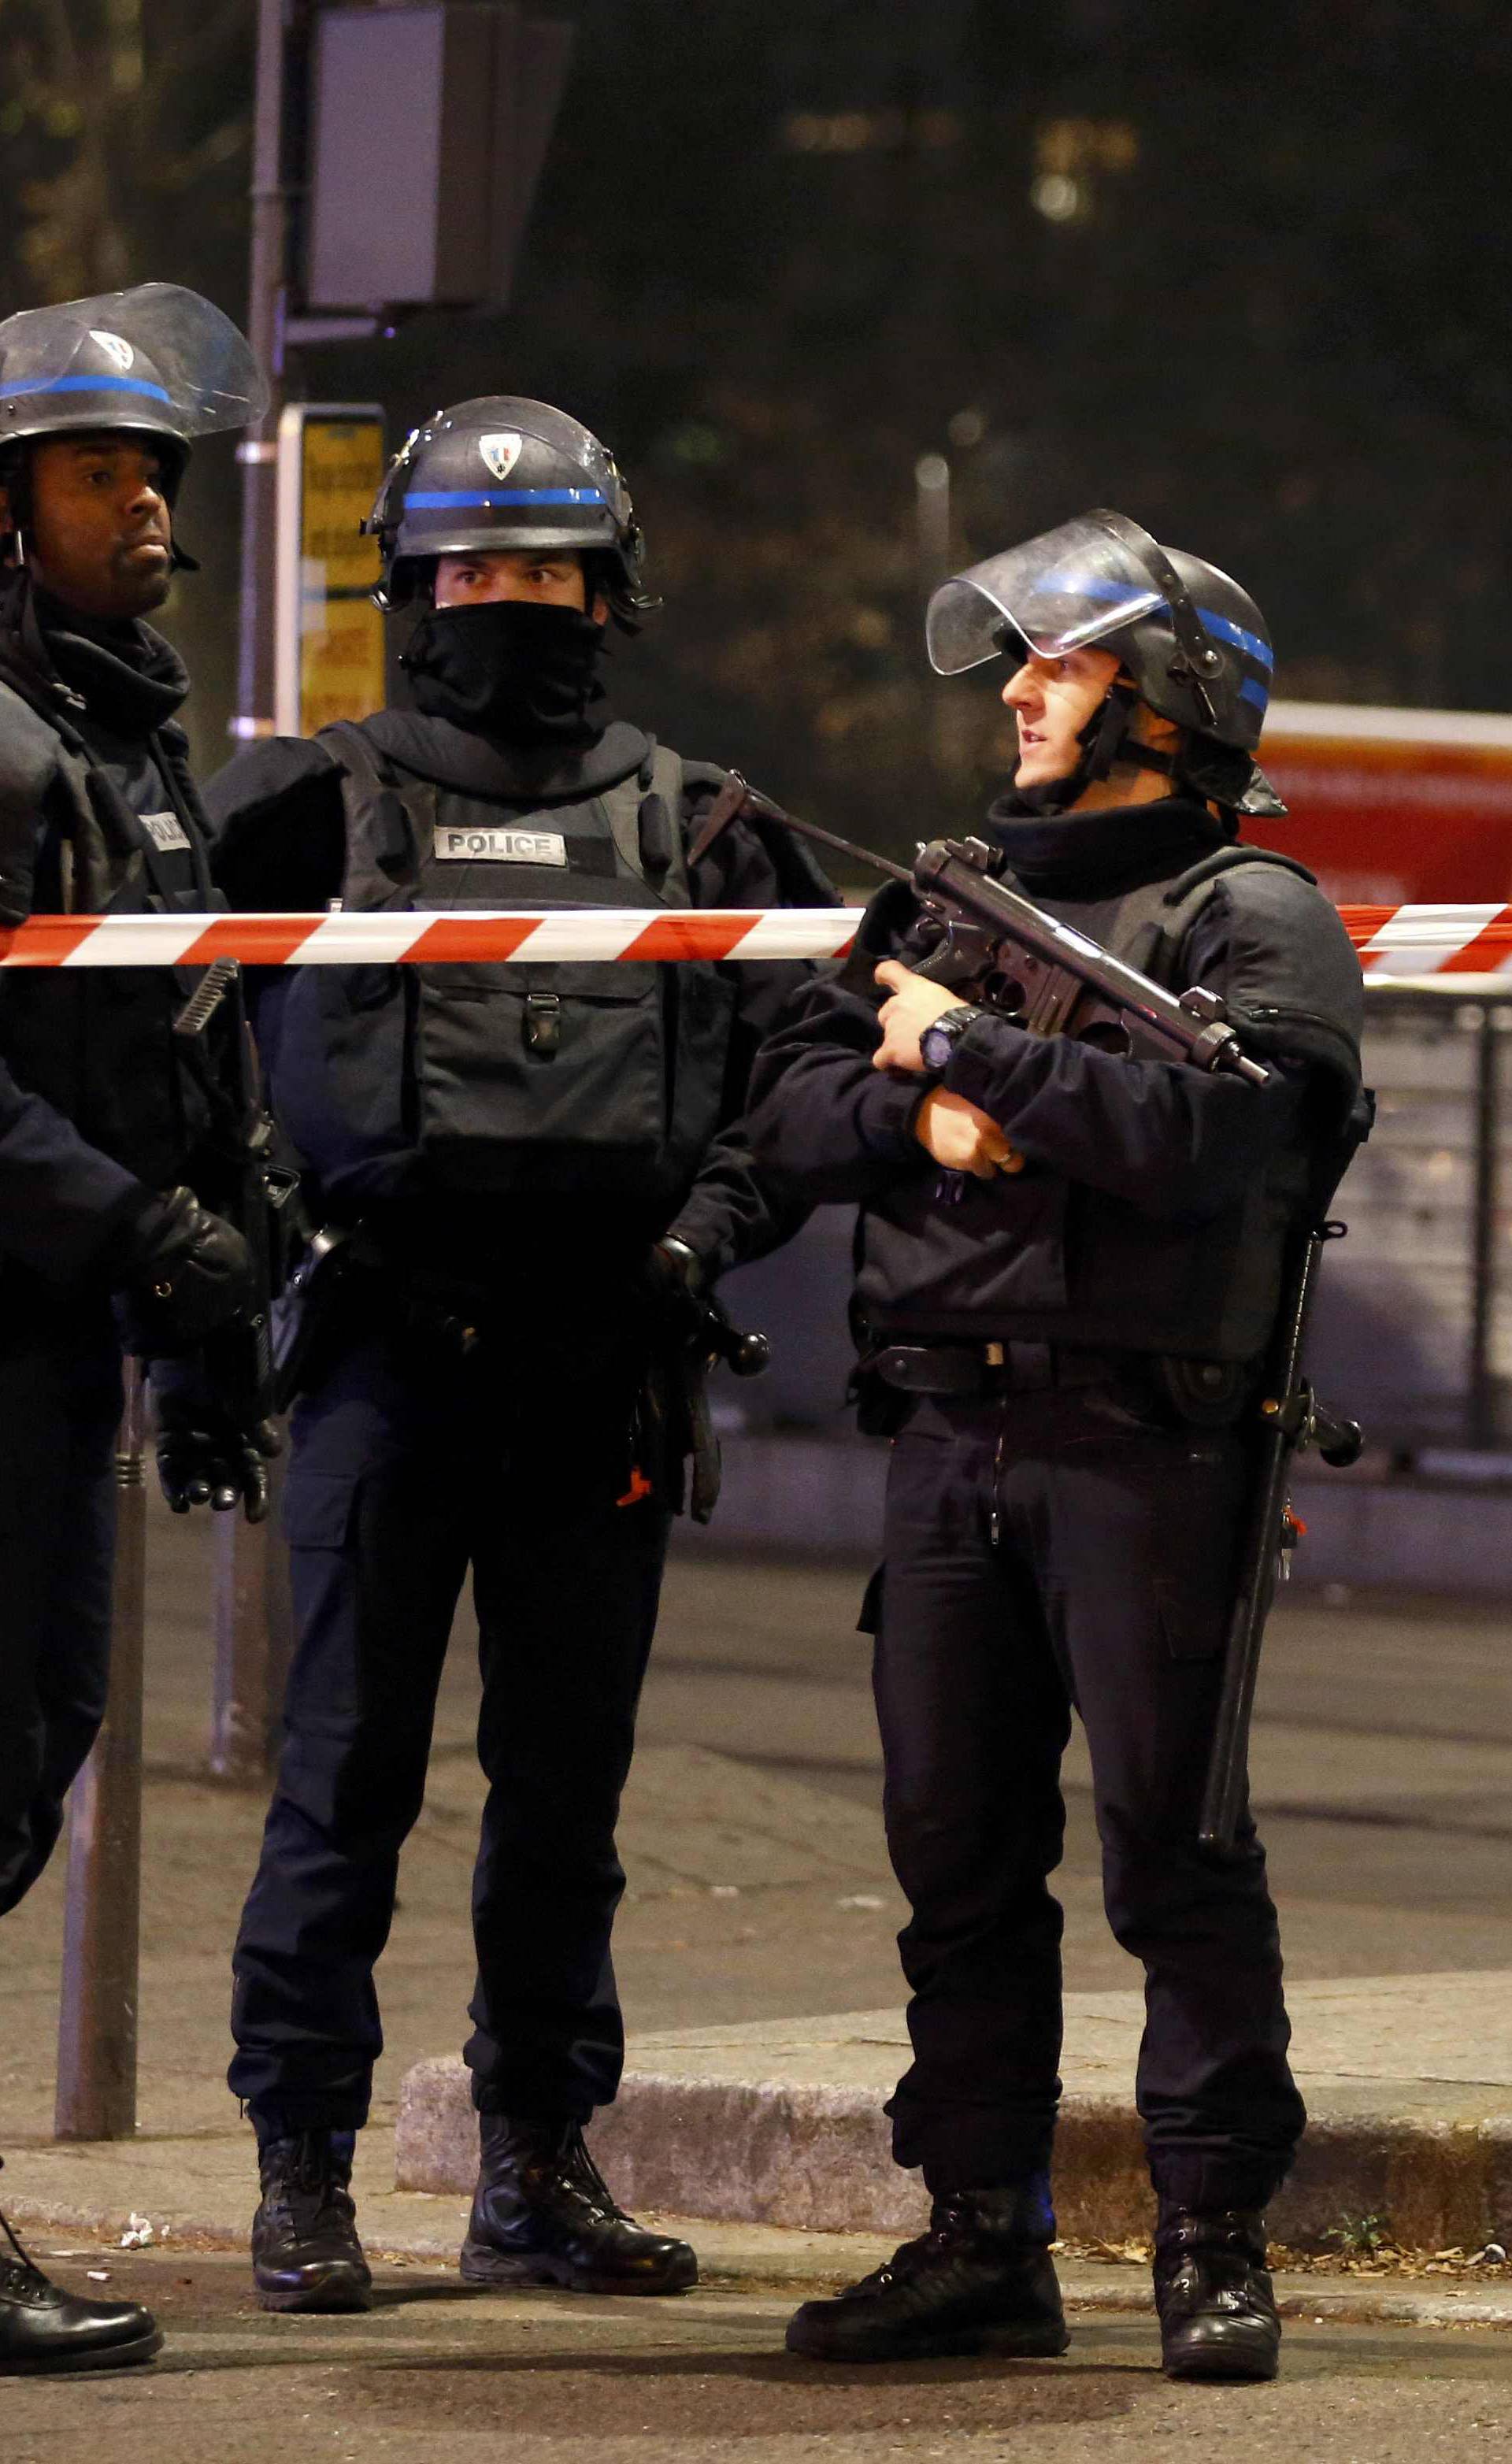 French police secure a street near the travel agency where a gunman has taken hostage about half a dozen people in what appears to be a robbery, a police source said, in Paris